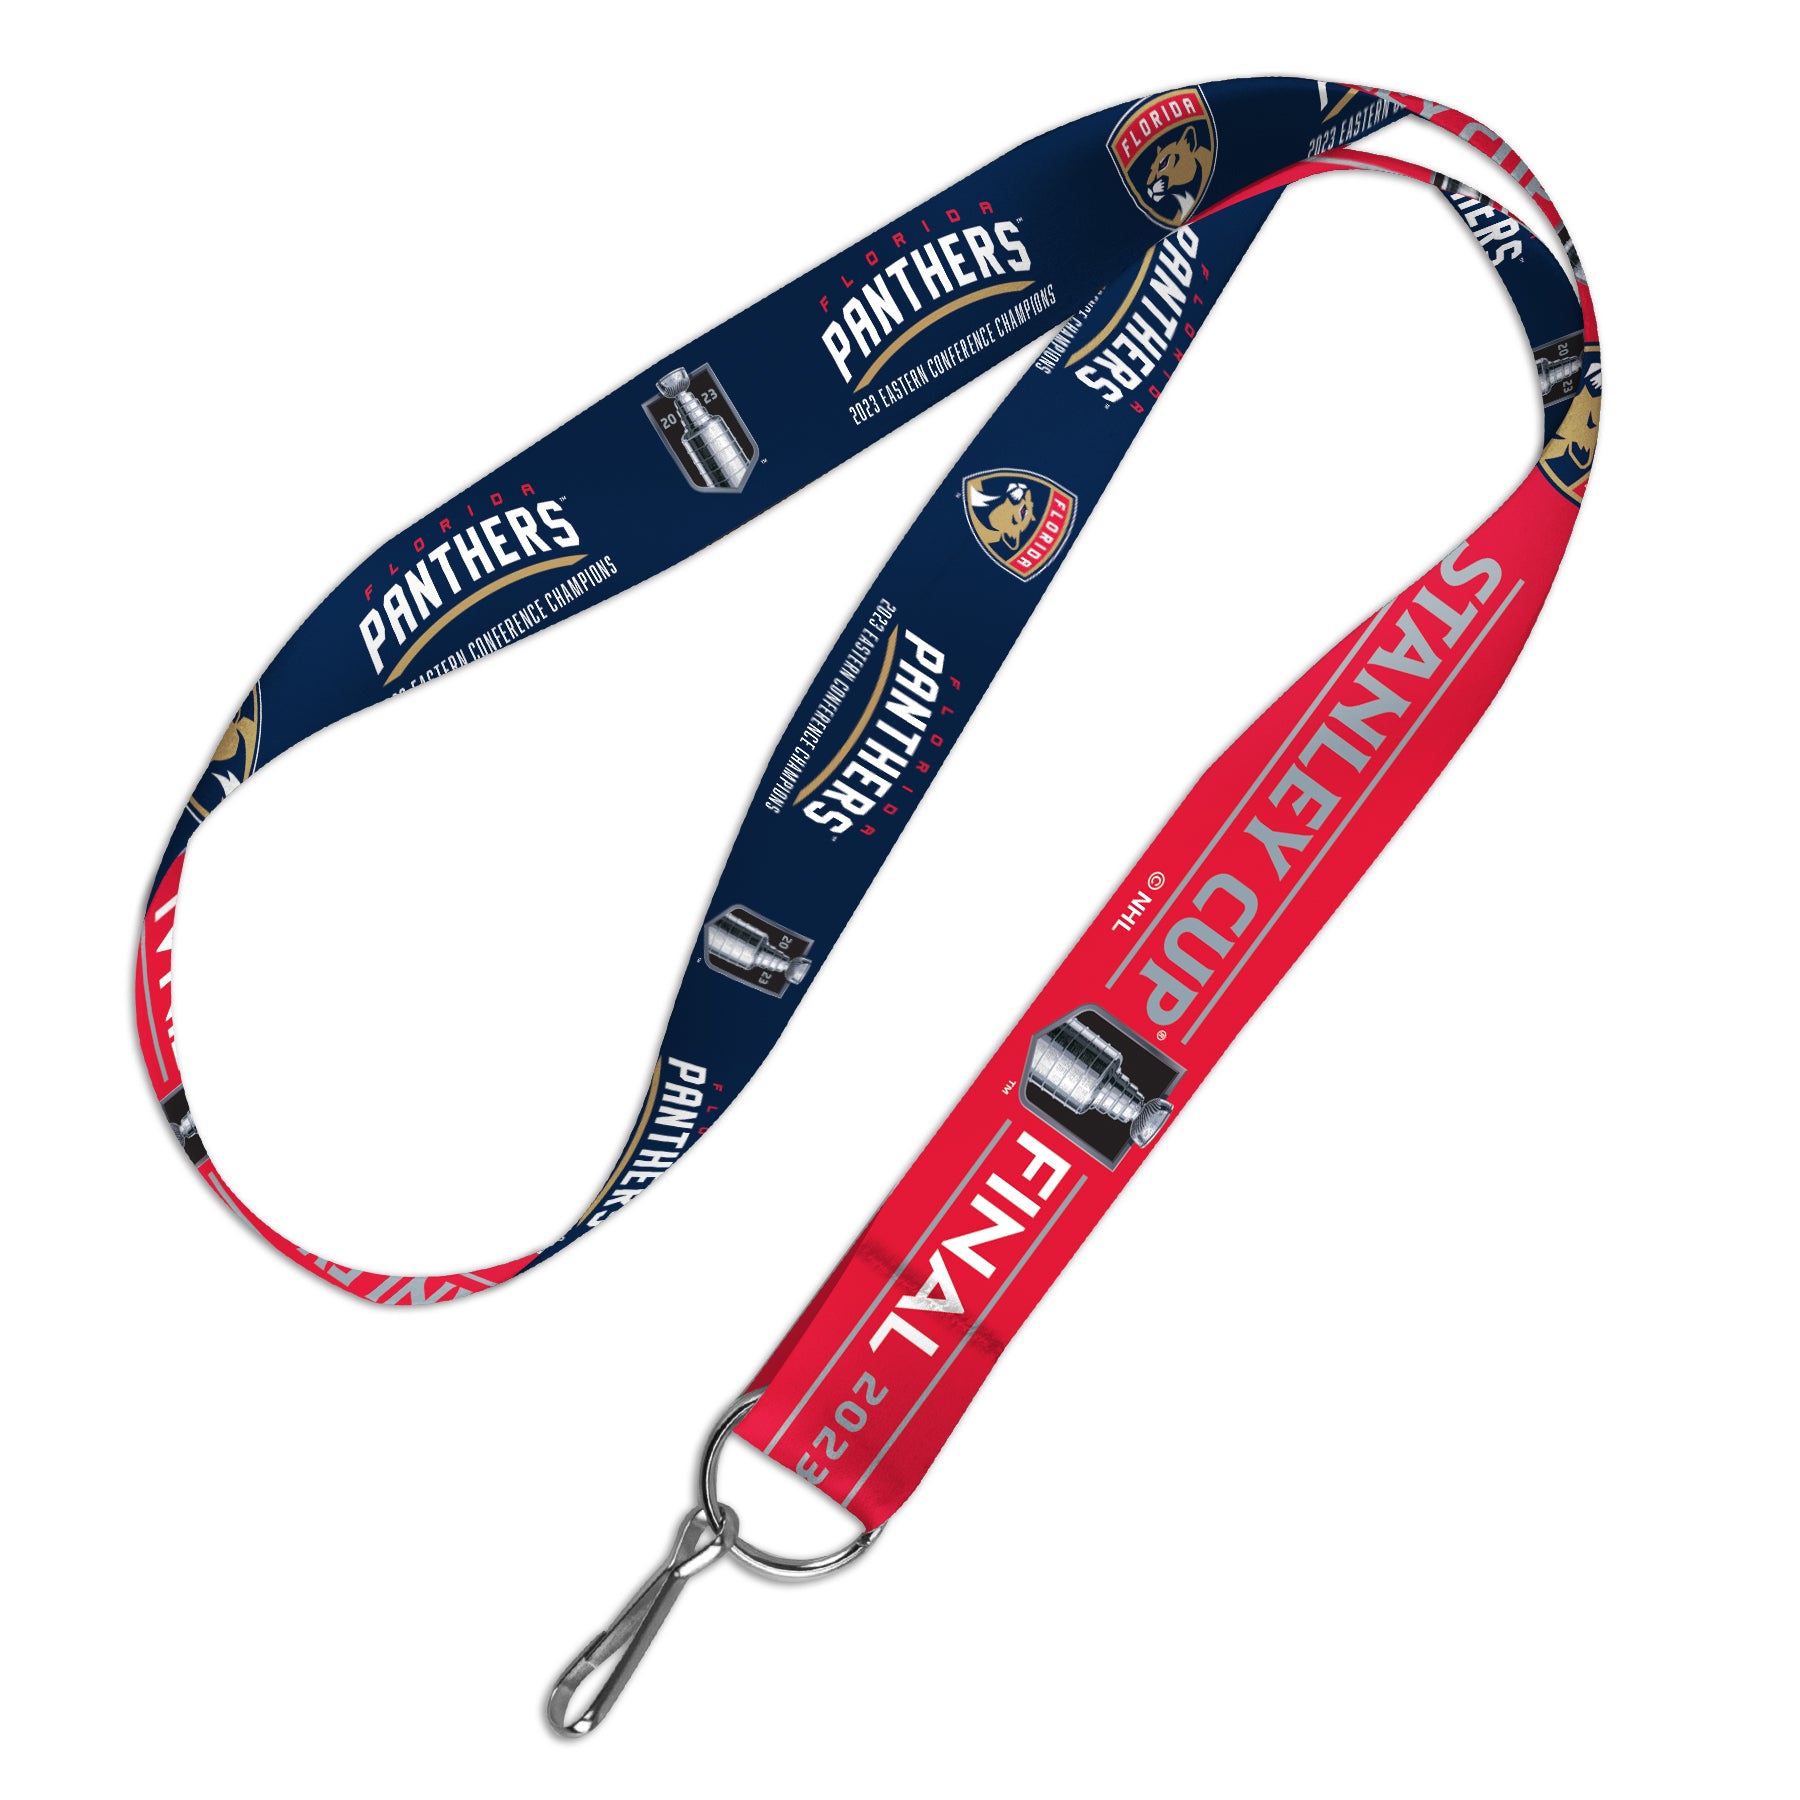 Florida Panthers 2023 Stanley Cup Final Multi-Use Decal - 3